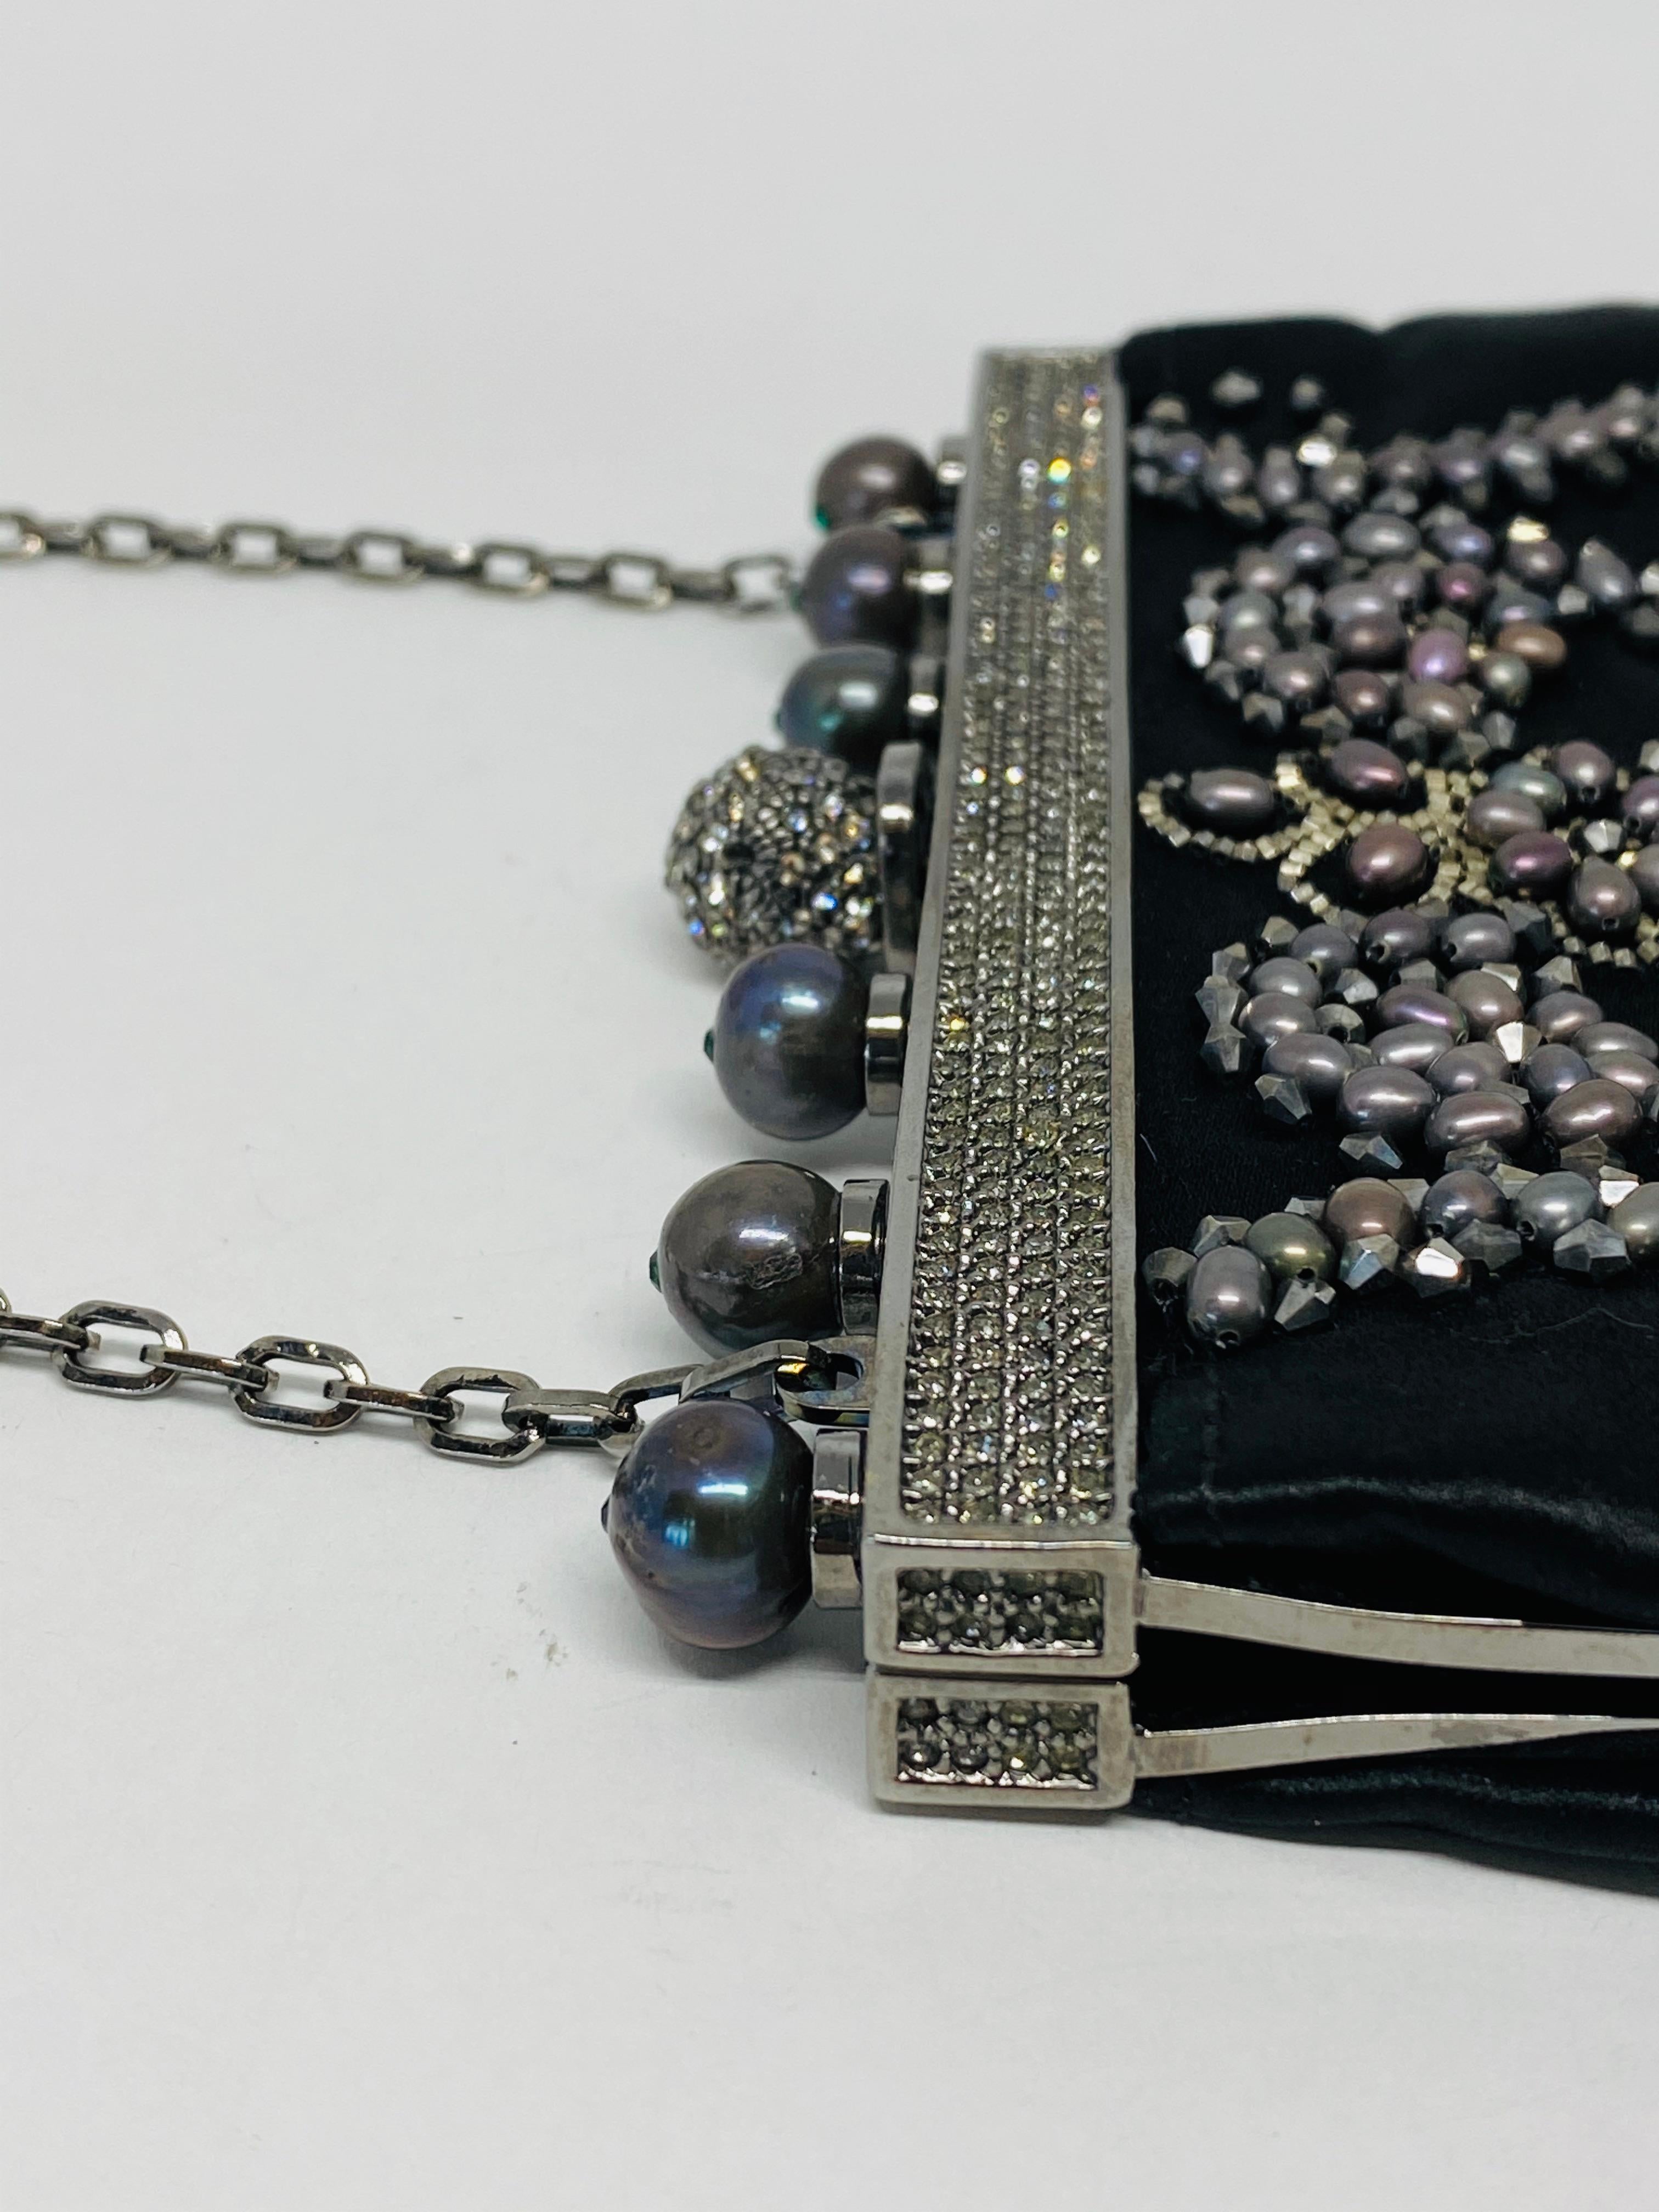 Vintage VALENTINO Garavani Black Bead Pearl Evening Mini Clutch Bag w/ Chain  In Excellent Condition For Sale In Beverly Hills, CA